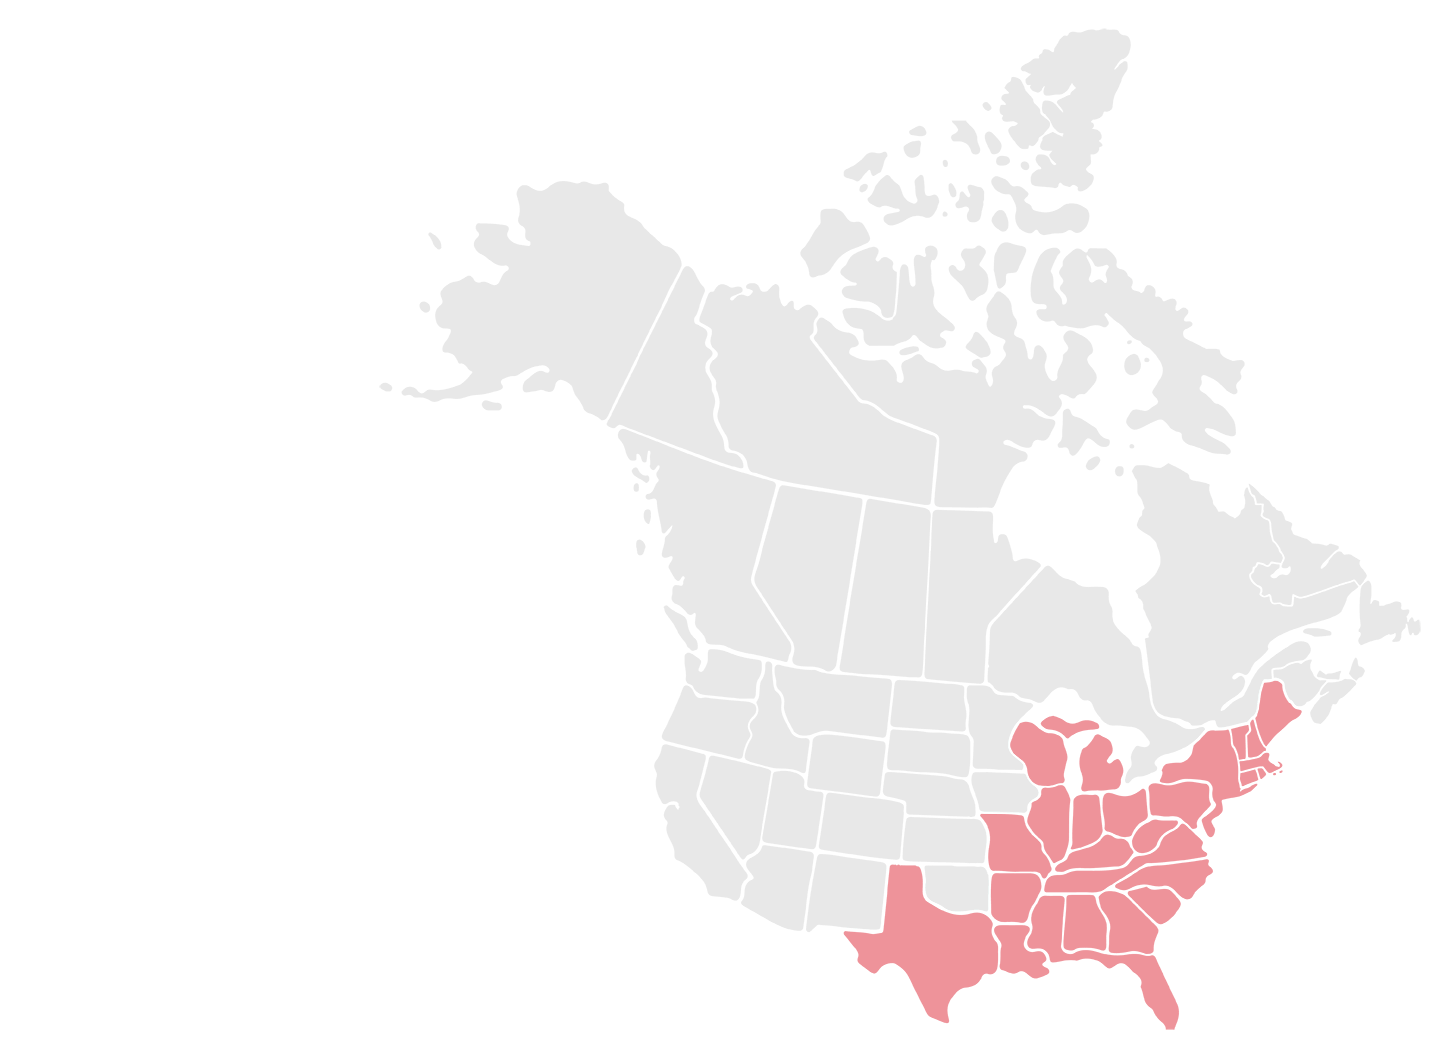 US and Canada map with the eastern US states highlighted